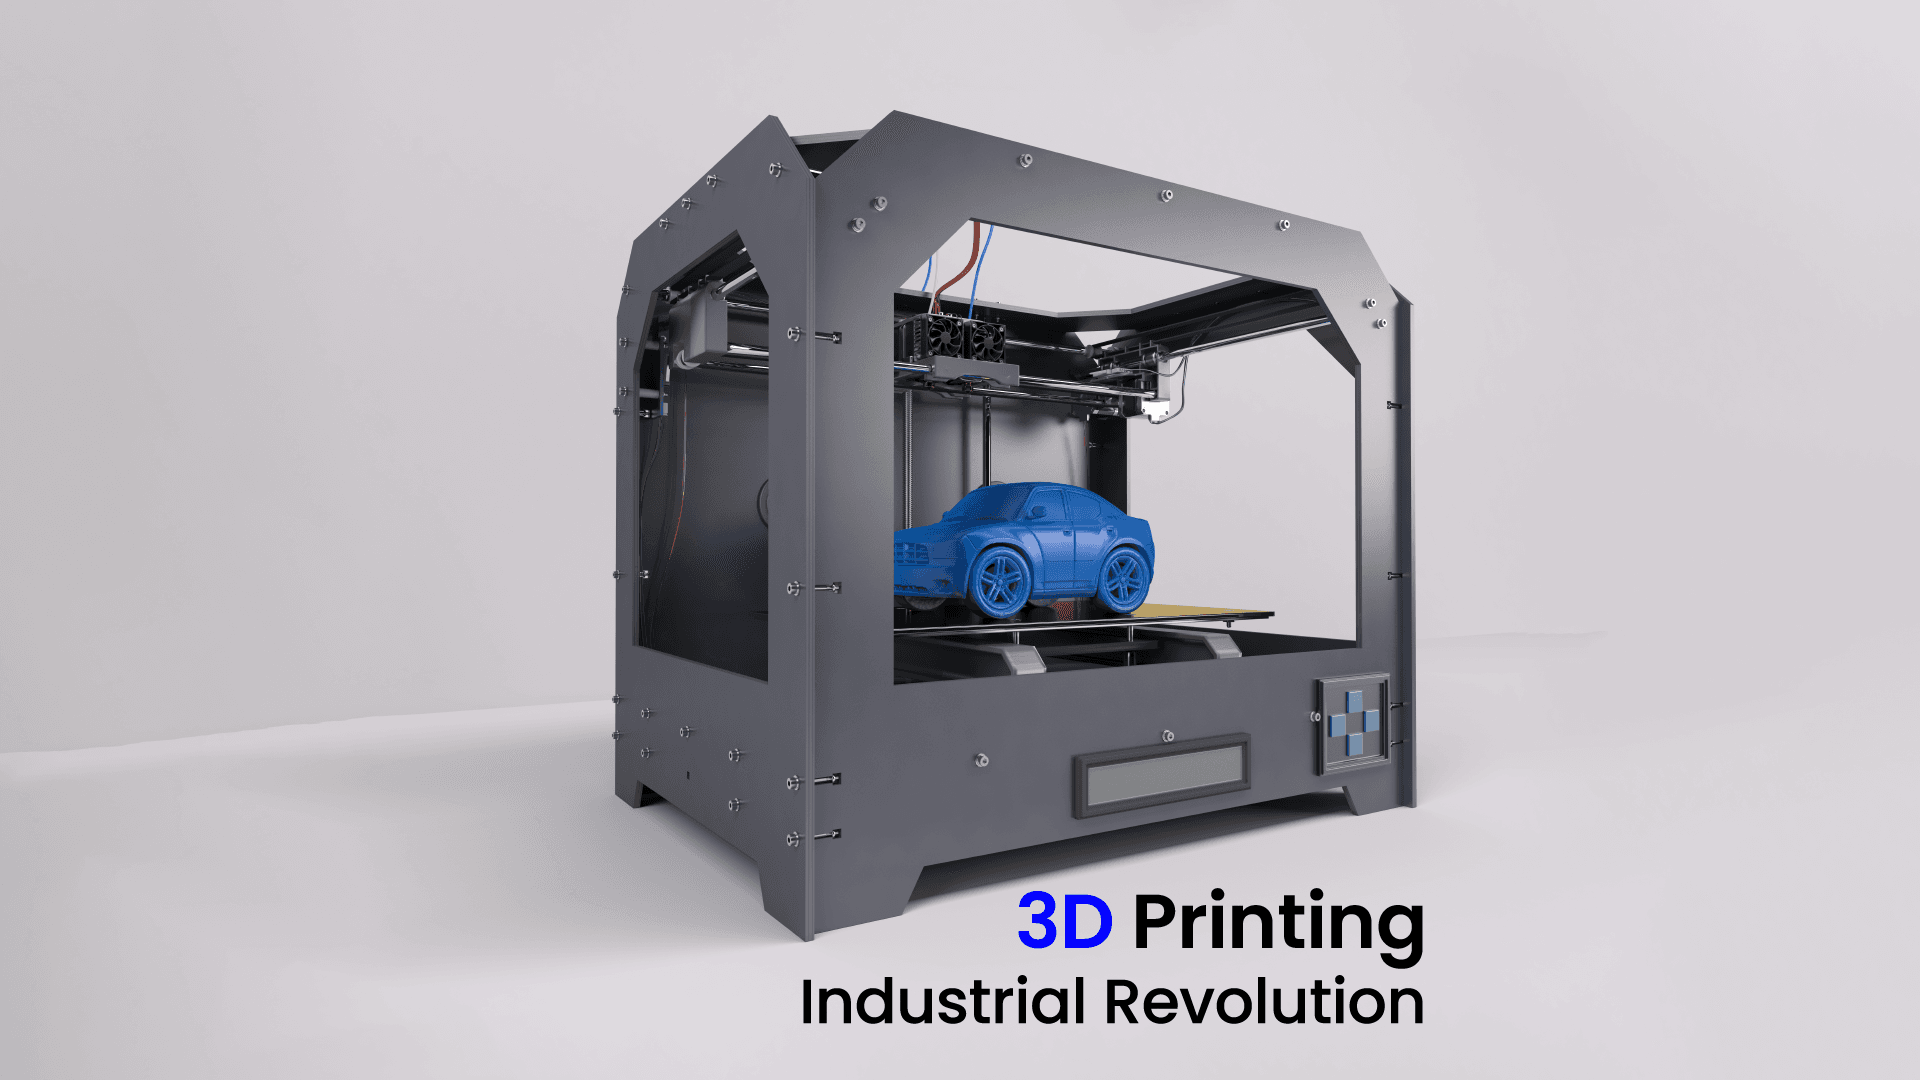 Industrial Revolution with 3D Printing